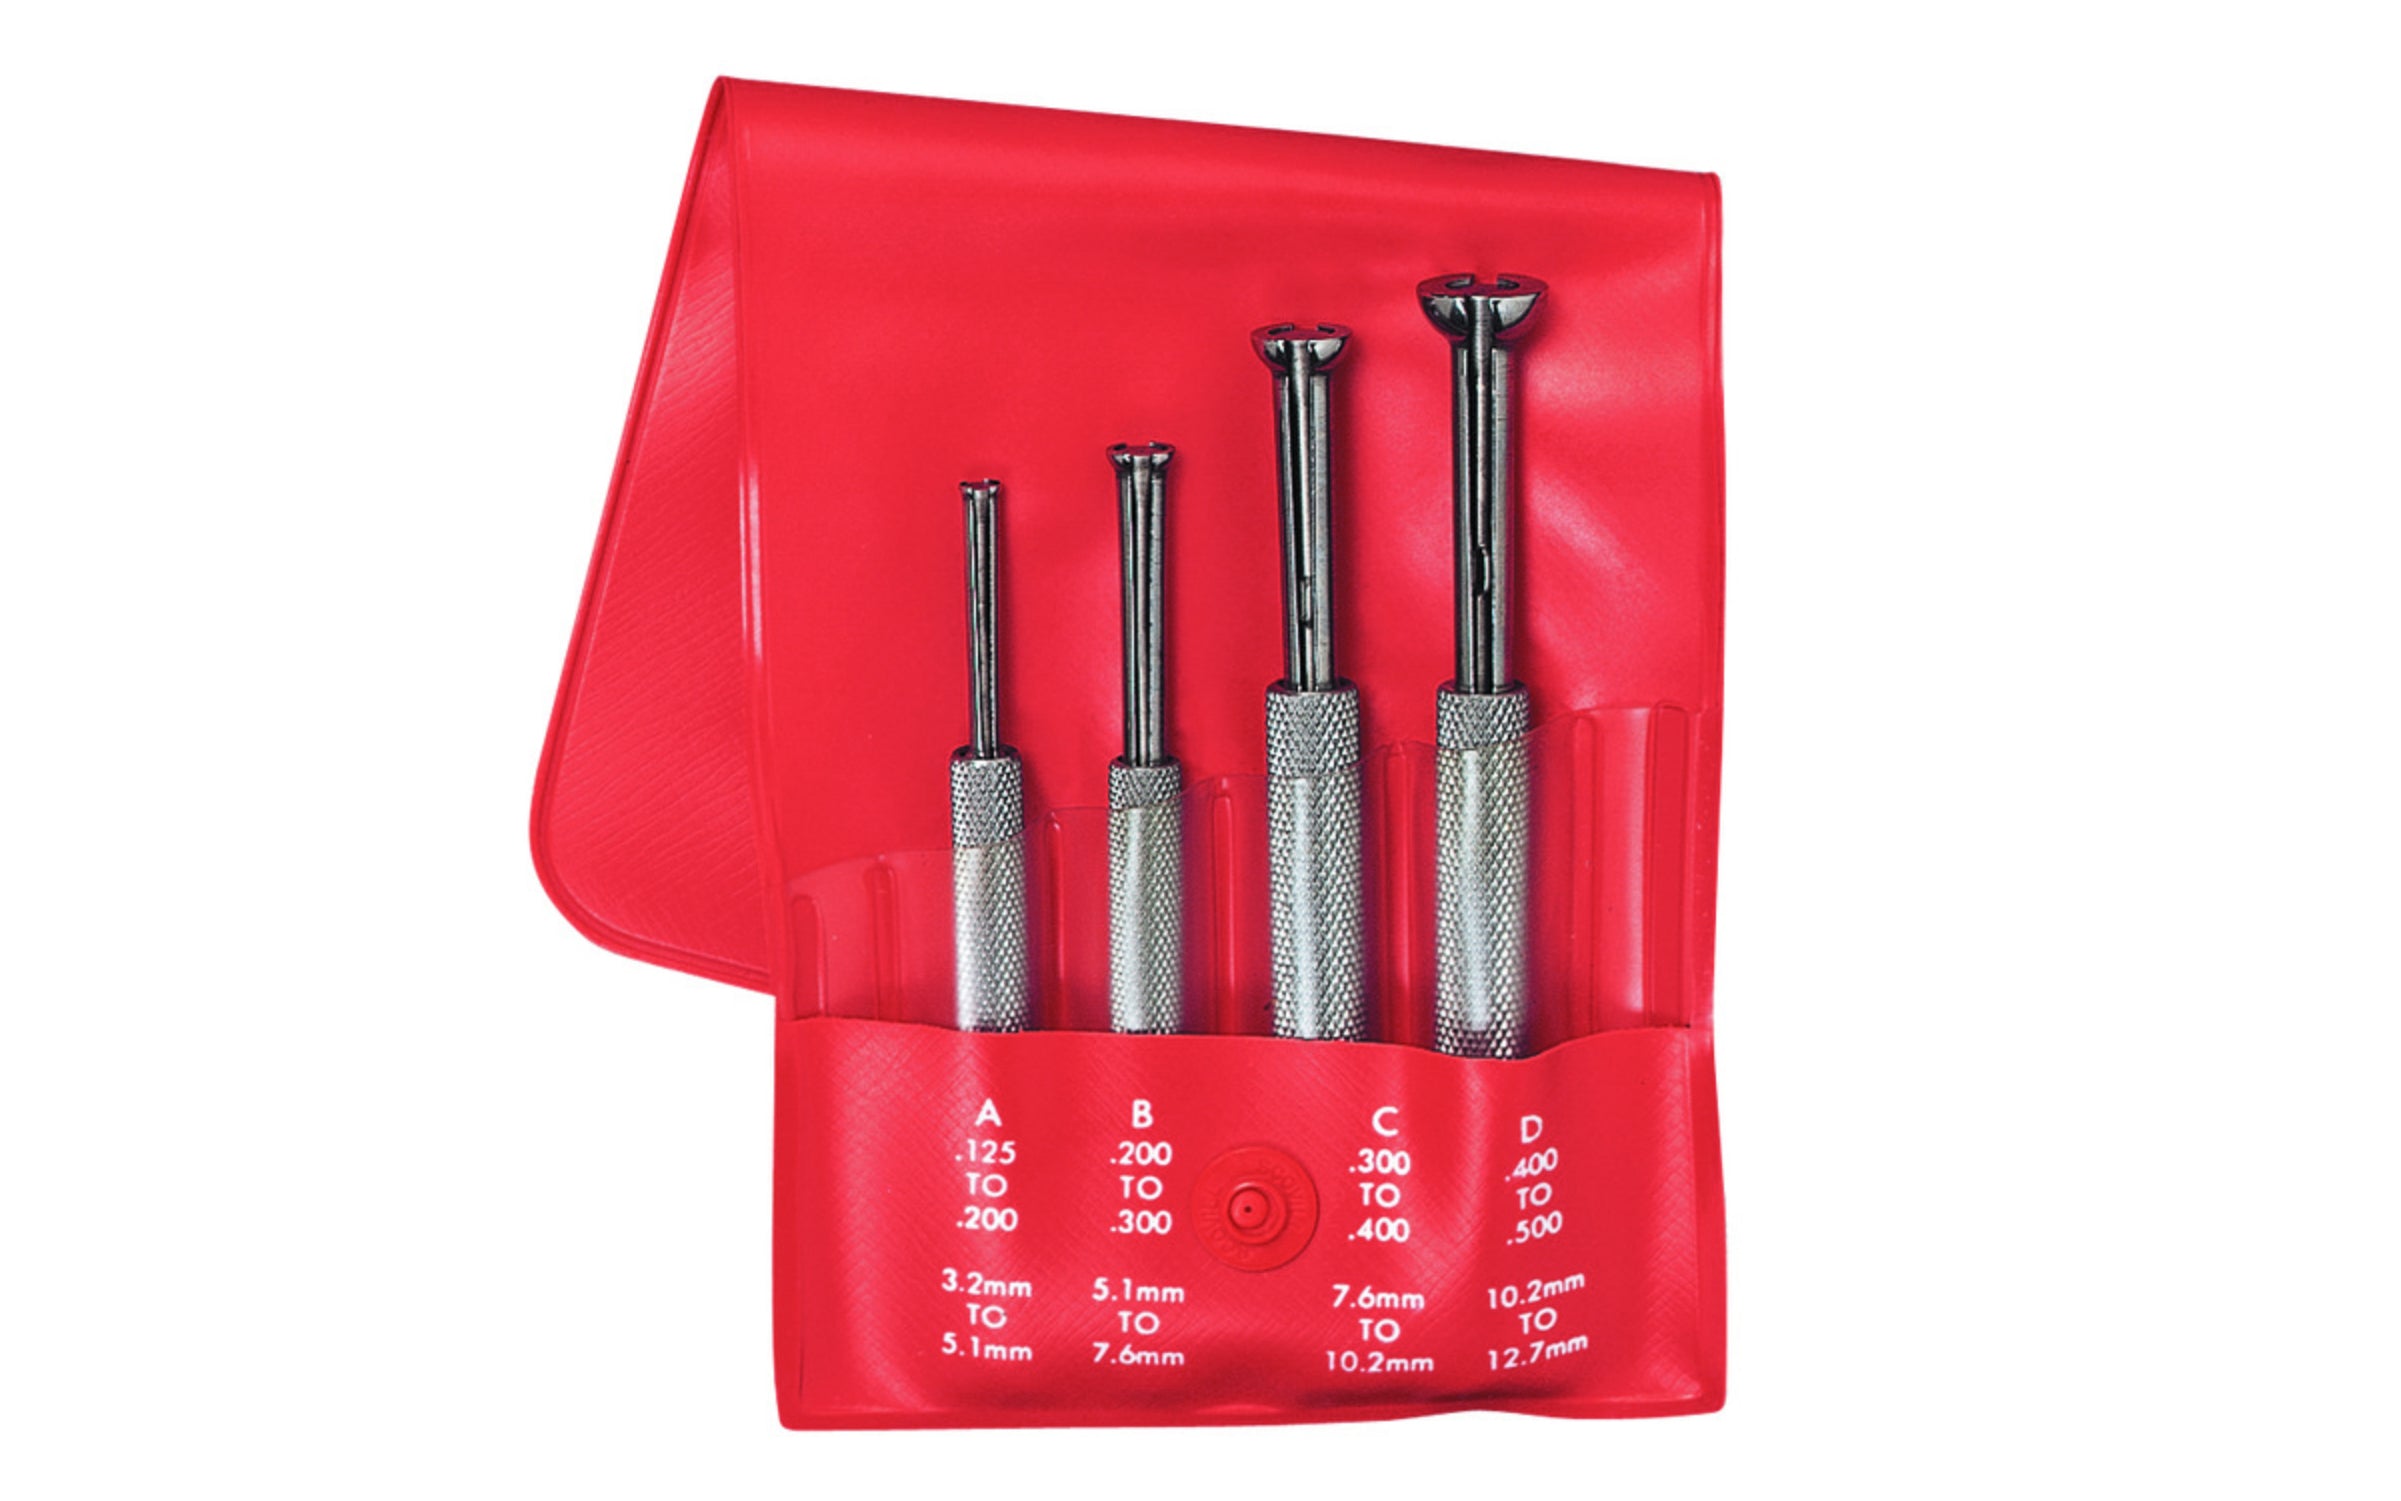 Starrett S831EZ Small Hole Gage Set. The Starrett 831 Small Hole Gage Set contains a gaging surface that is a half-ball with a flat bottom. This permits use in even the most shallow holes, slots, and recesses. SET of 4: Nos. 831A/B/C/D, in Case.  Made in USA. 049659530872